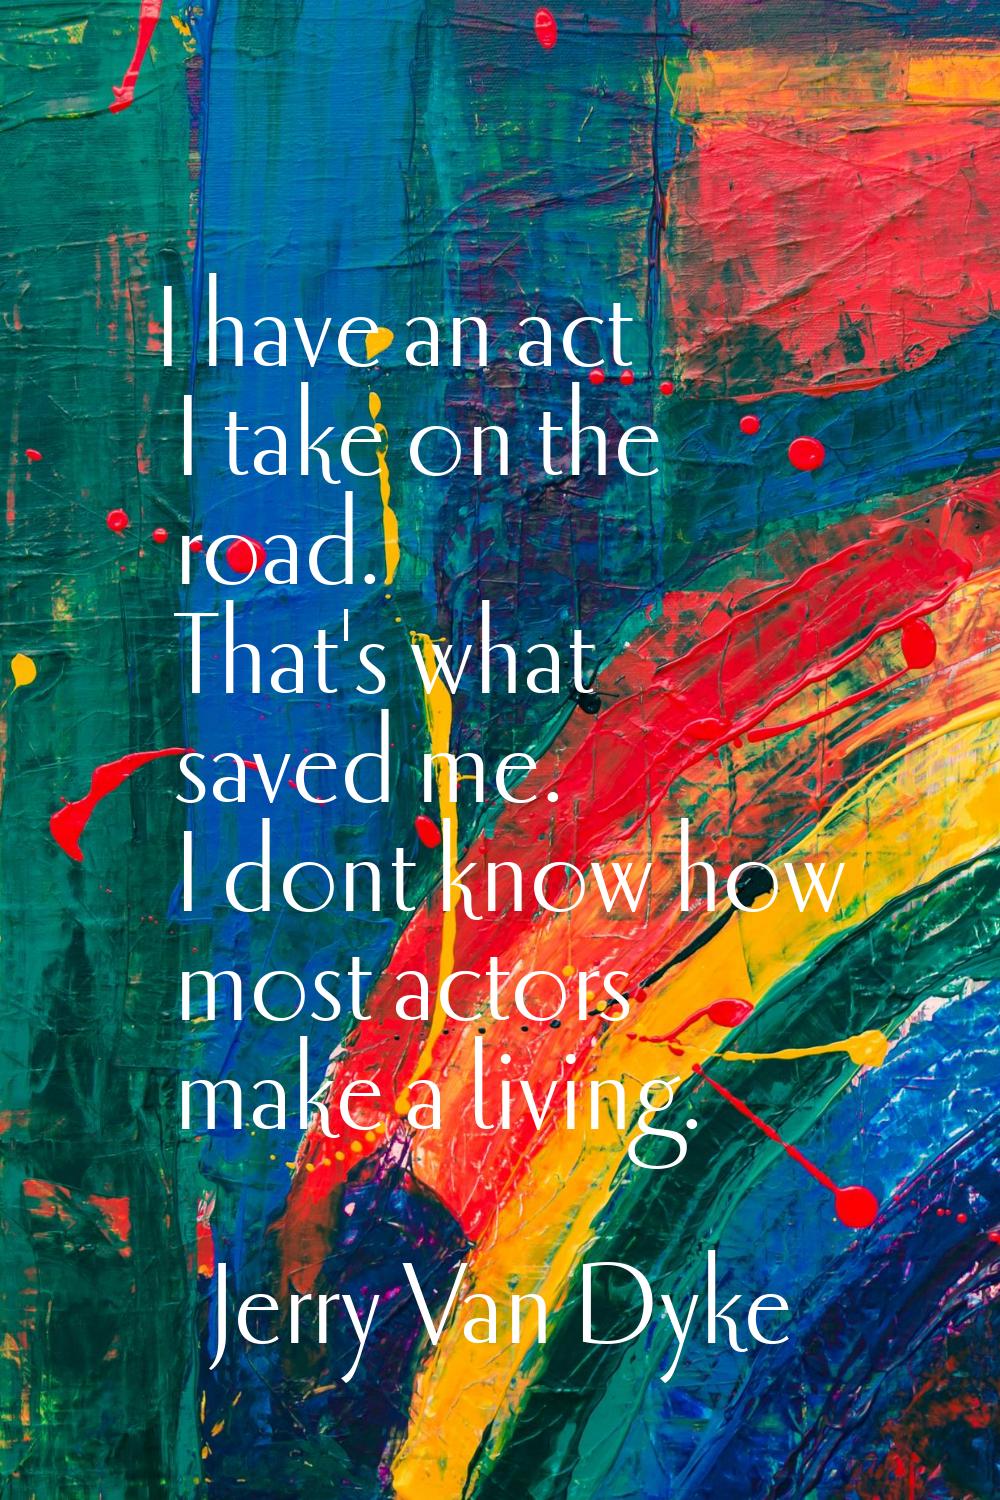 I have an act I take on the road. That's what saved me. I dont know how most actors make a living.